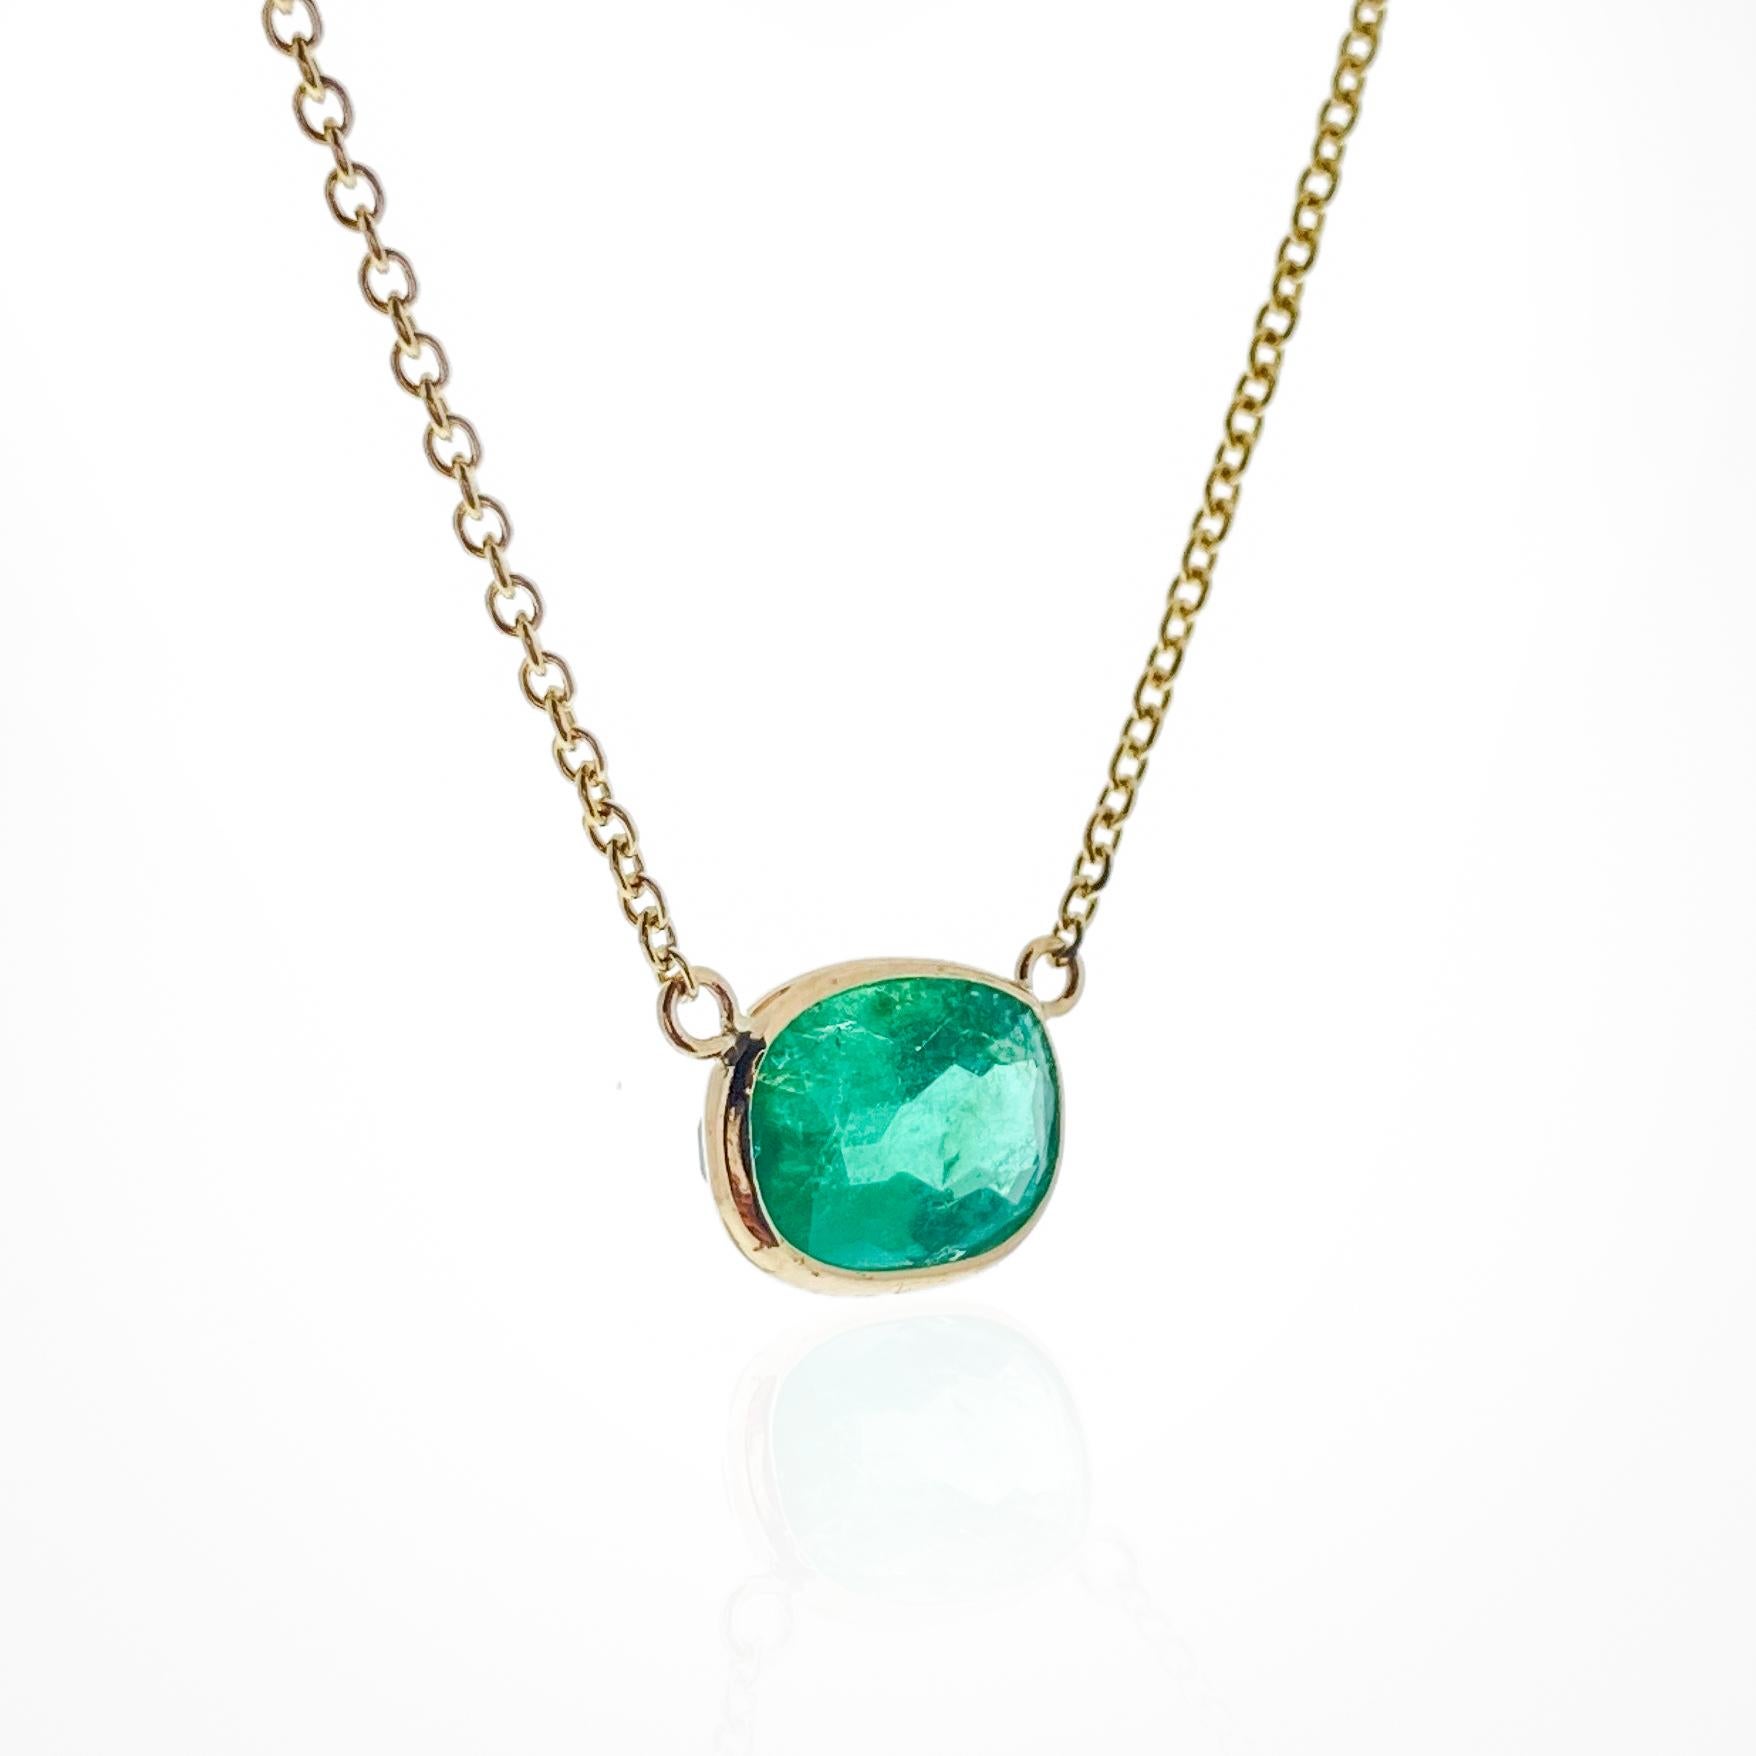 This necklace features an oval-cut green emerald with a weight of 1.98 carats, set in 14k yellow gold (YG). Emeralds are well-known for their rich green color, and the oval cut is a classic and elegant choice for gemstones, offering a timeless and